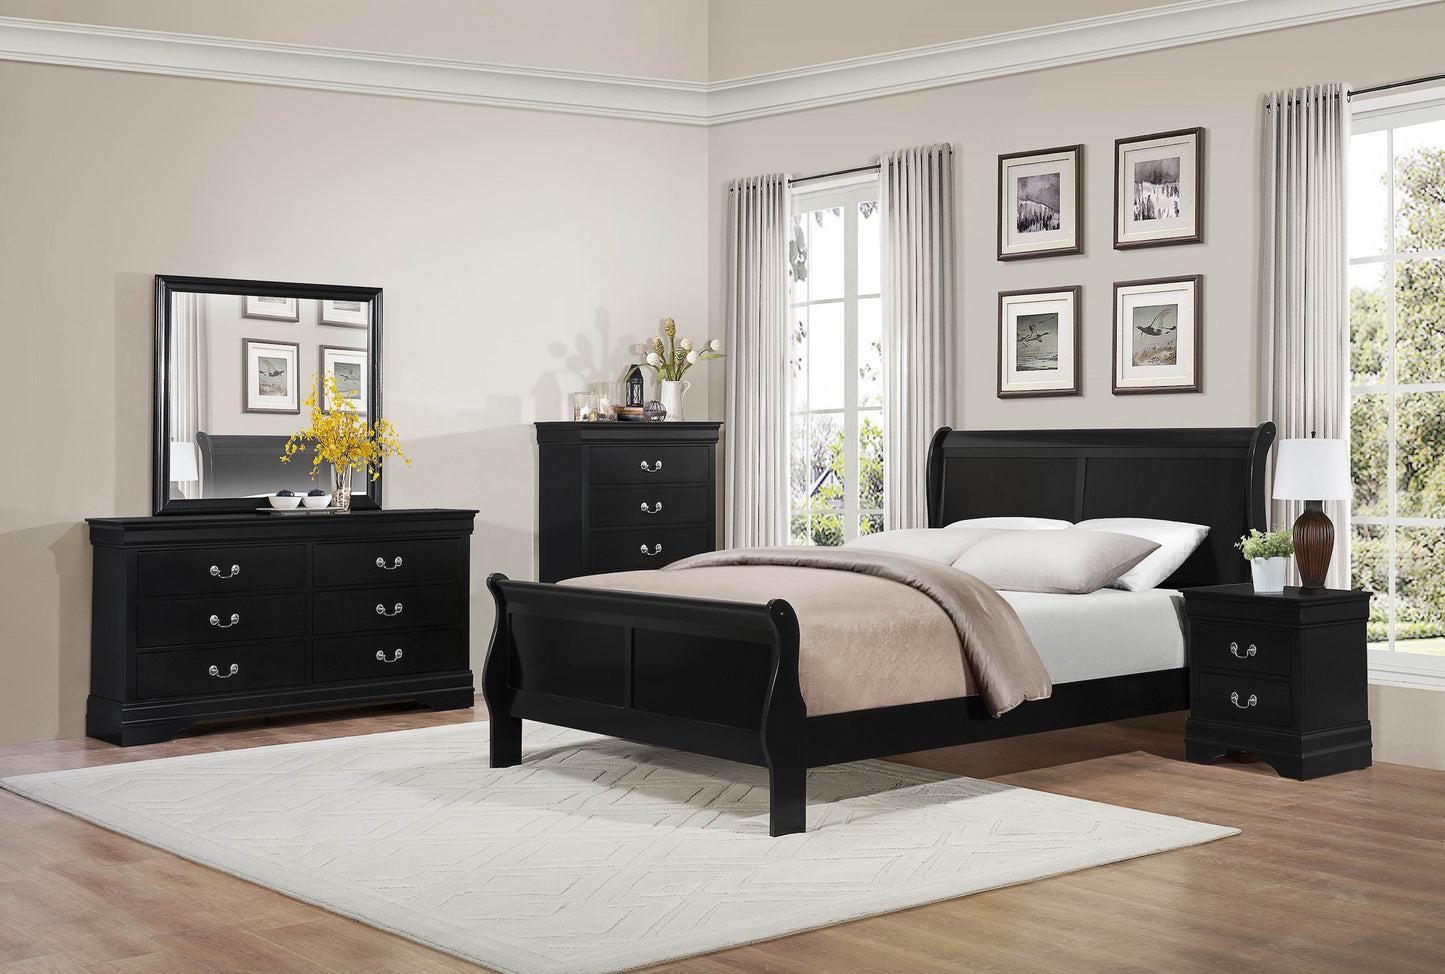 Manburg Louis Philippe 5PC Bedroom Set Cal King Sleigh Bed, Dresser, Mirror, Nightstand, Chest in Burnished Black